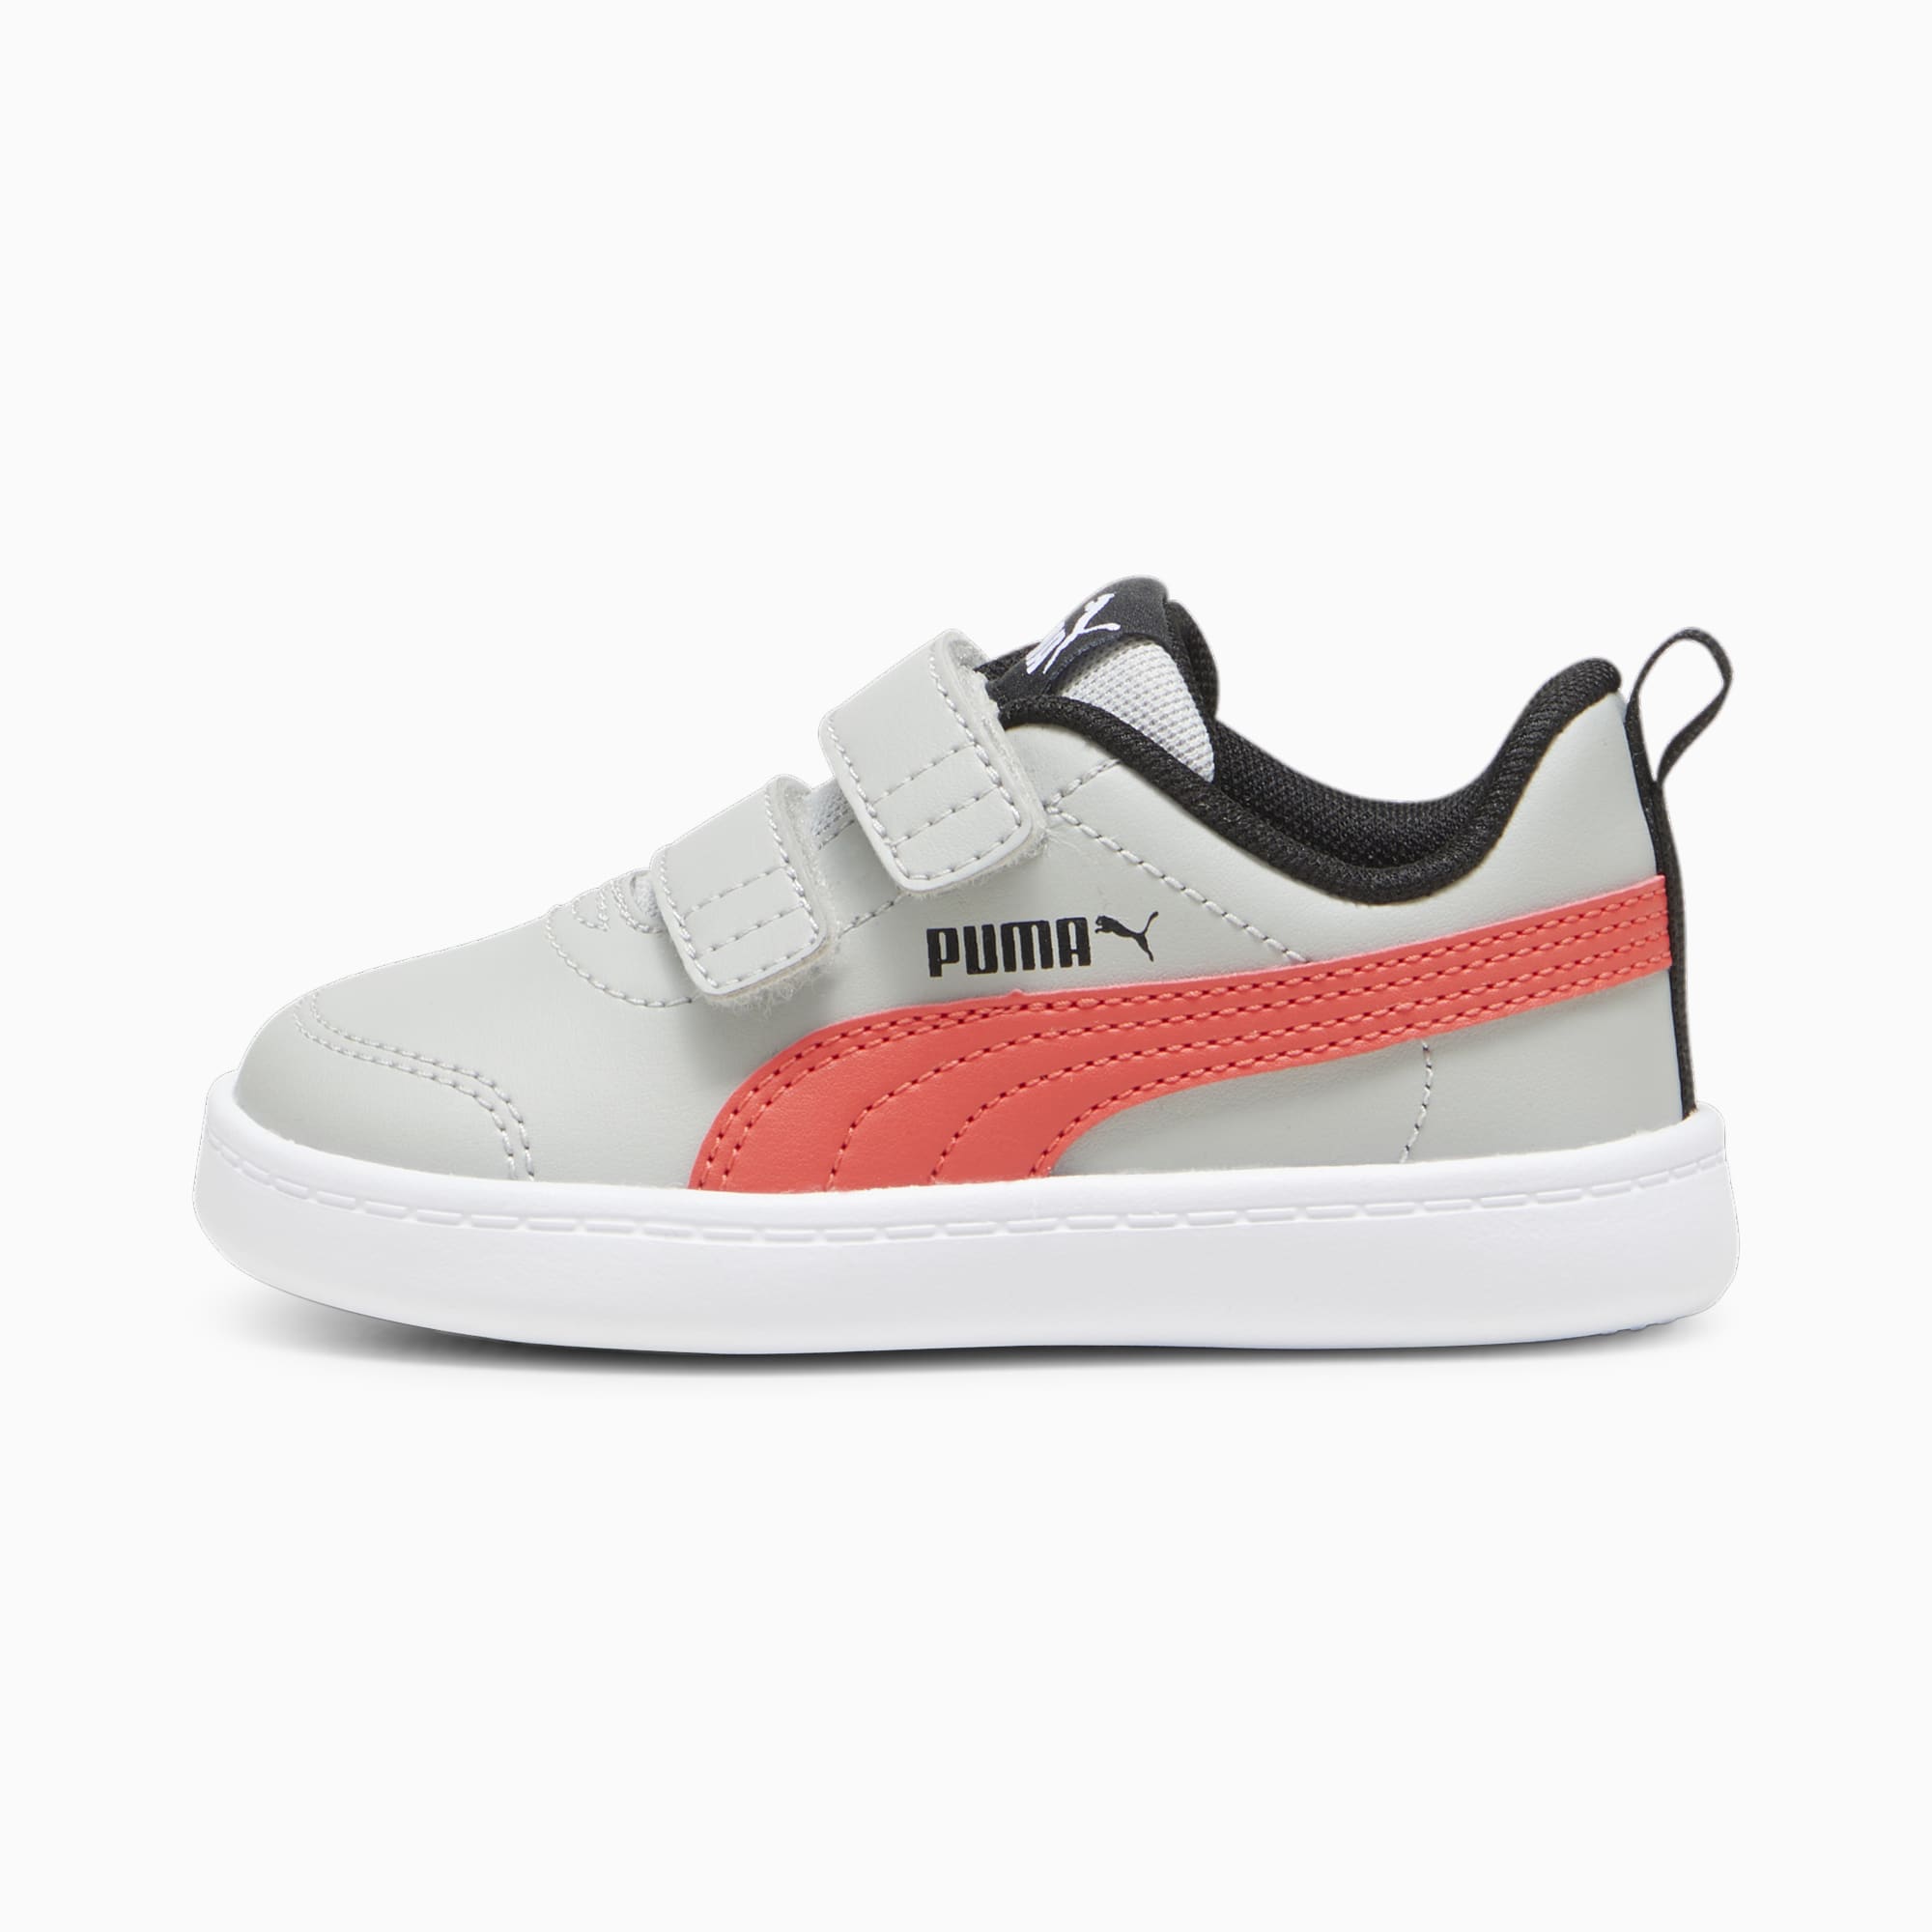 PUMA Courtflex V2 Babies' Trainers, Cool Light Grey/Active Red, Size 19, Shoes